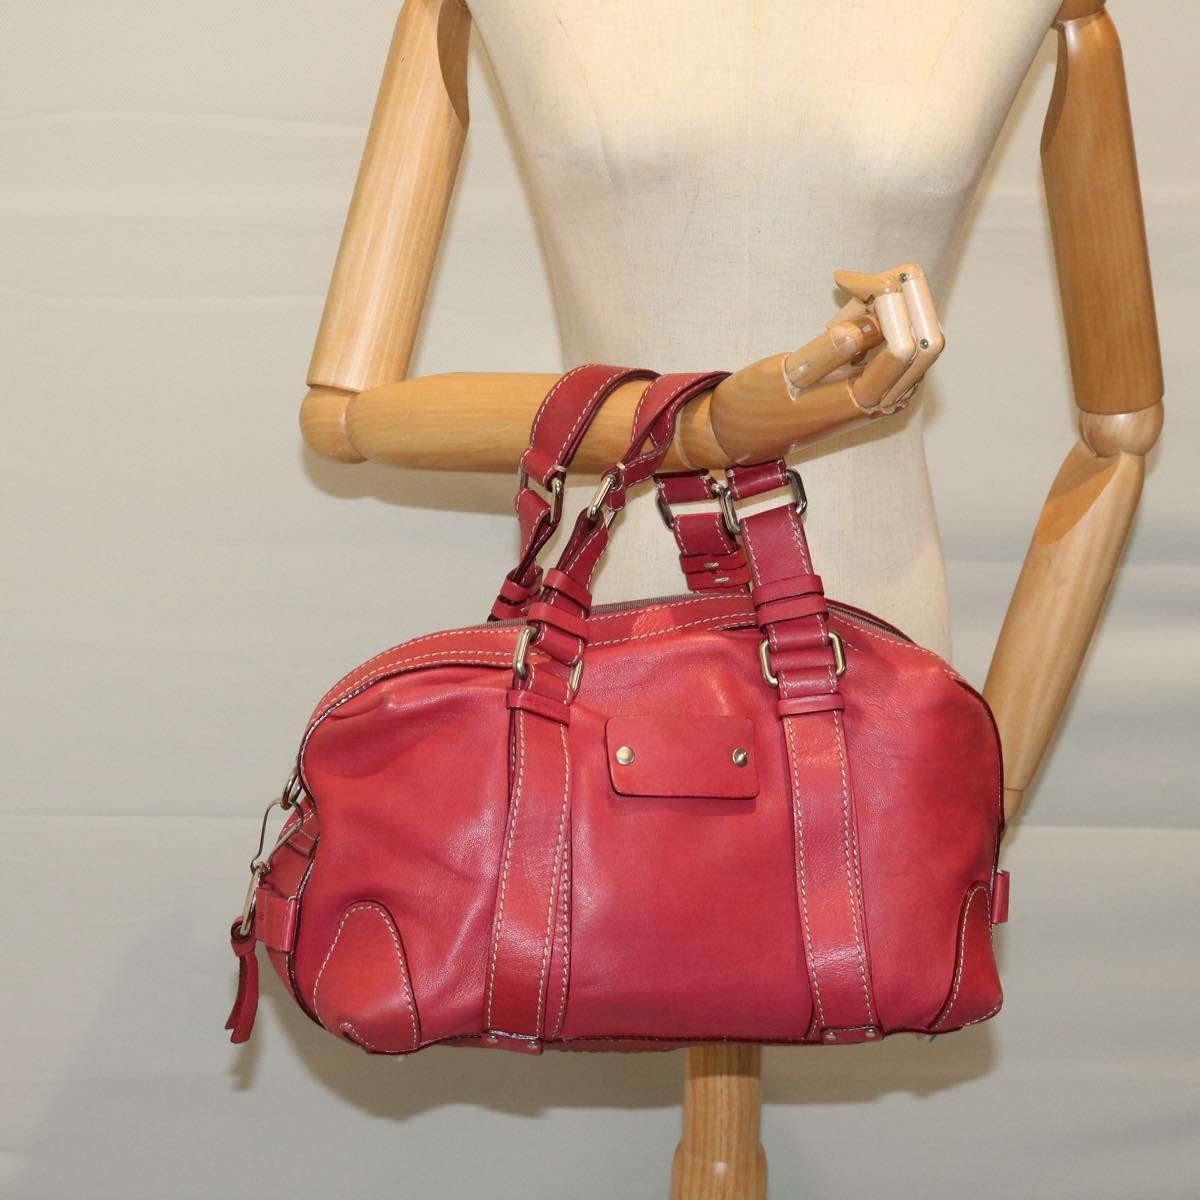 Chloe Hand Bag Leather Pink Auth bs12851